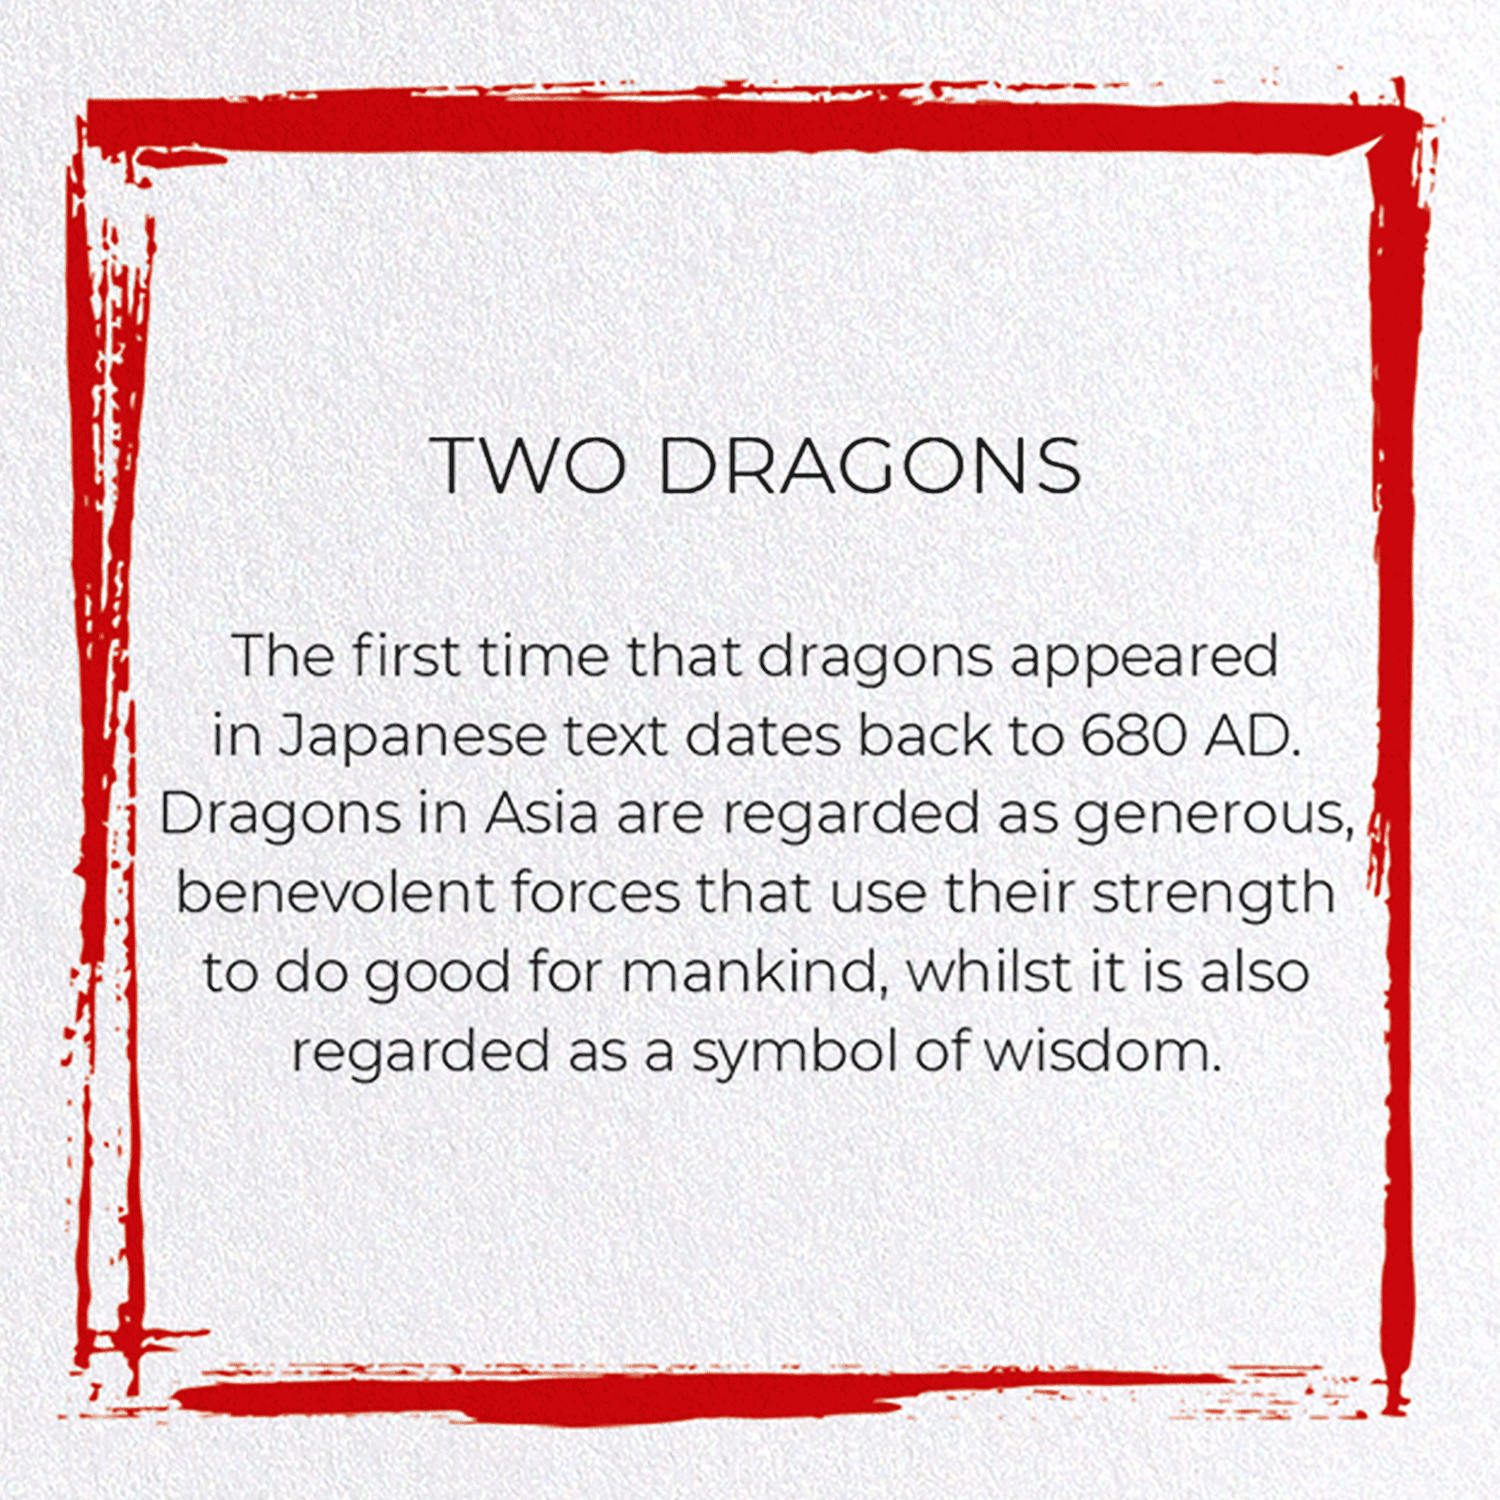 TWO DRAGONS